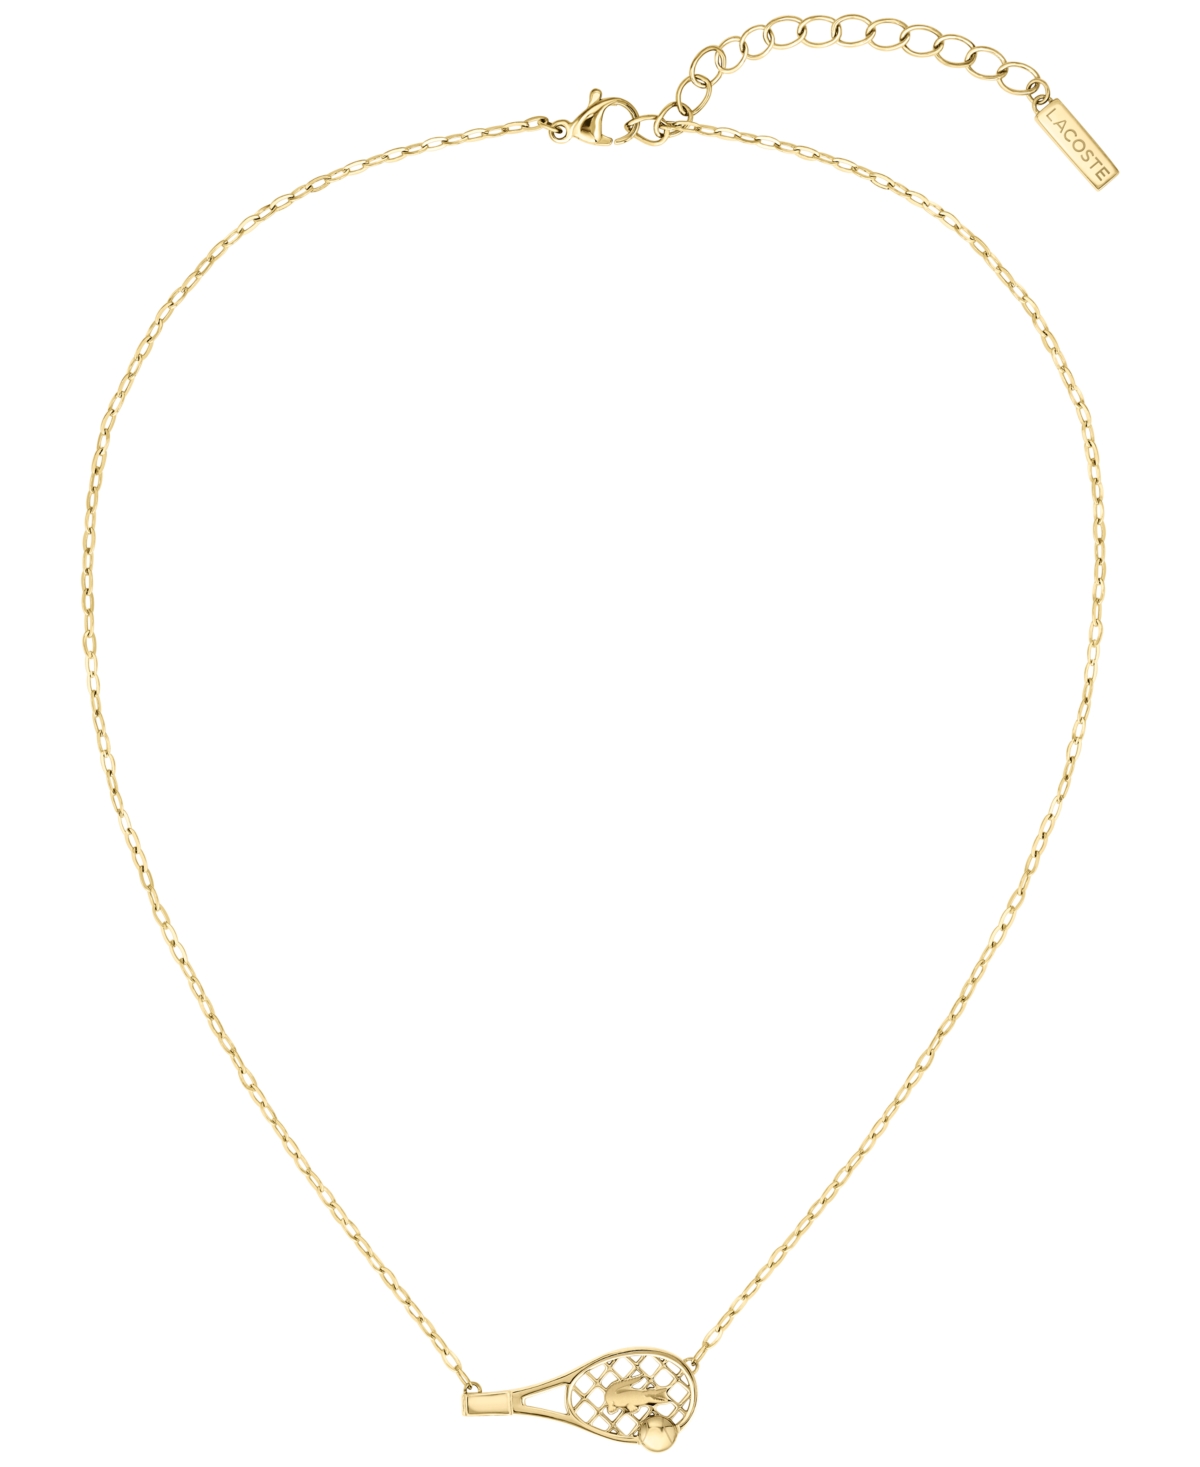 Lacoste Gold Tone Tennis Racket Necklace